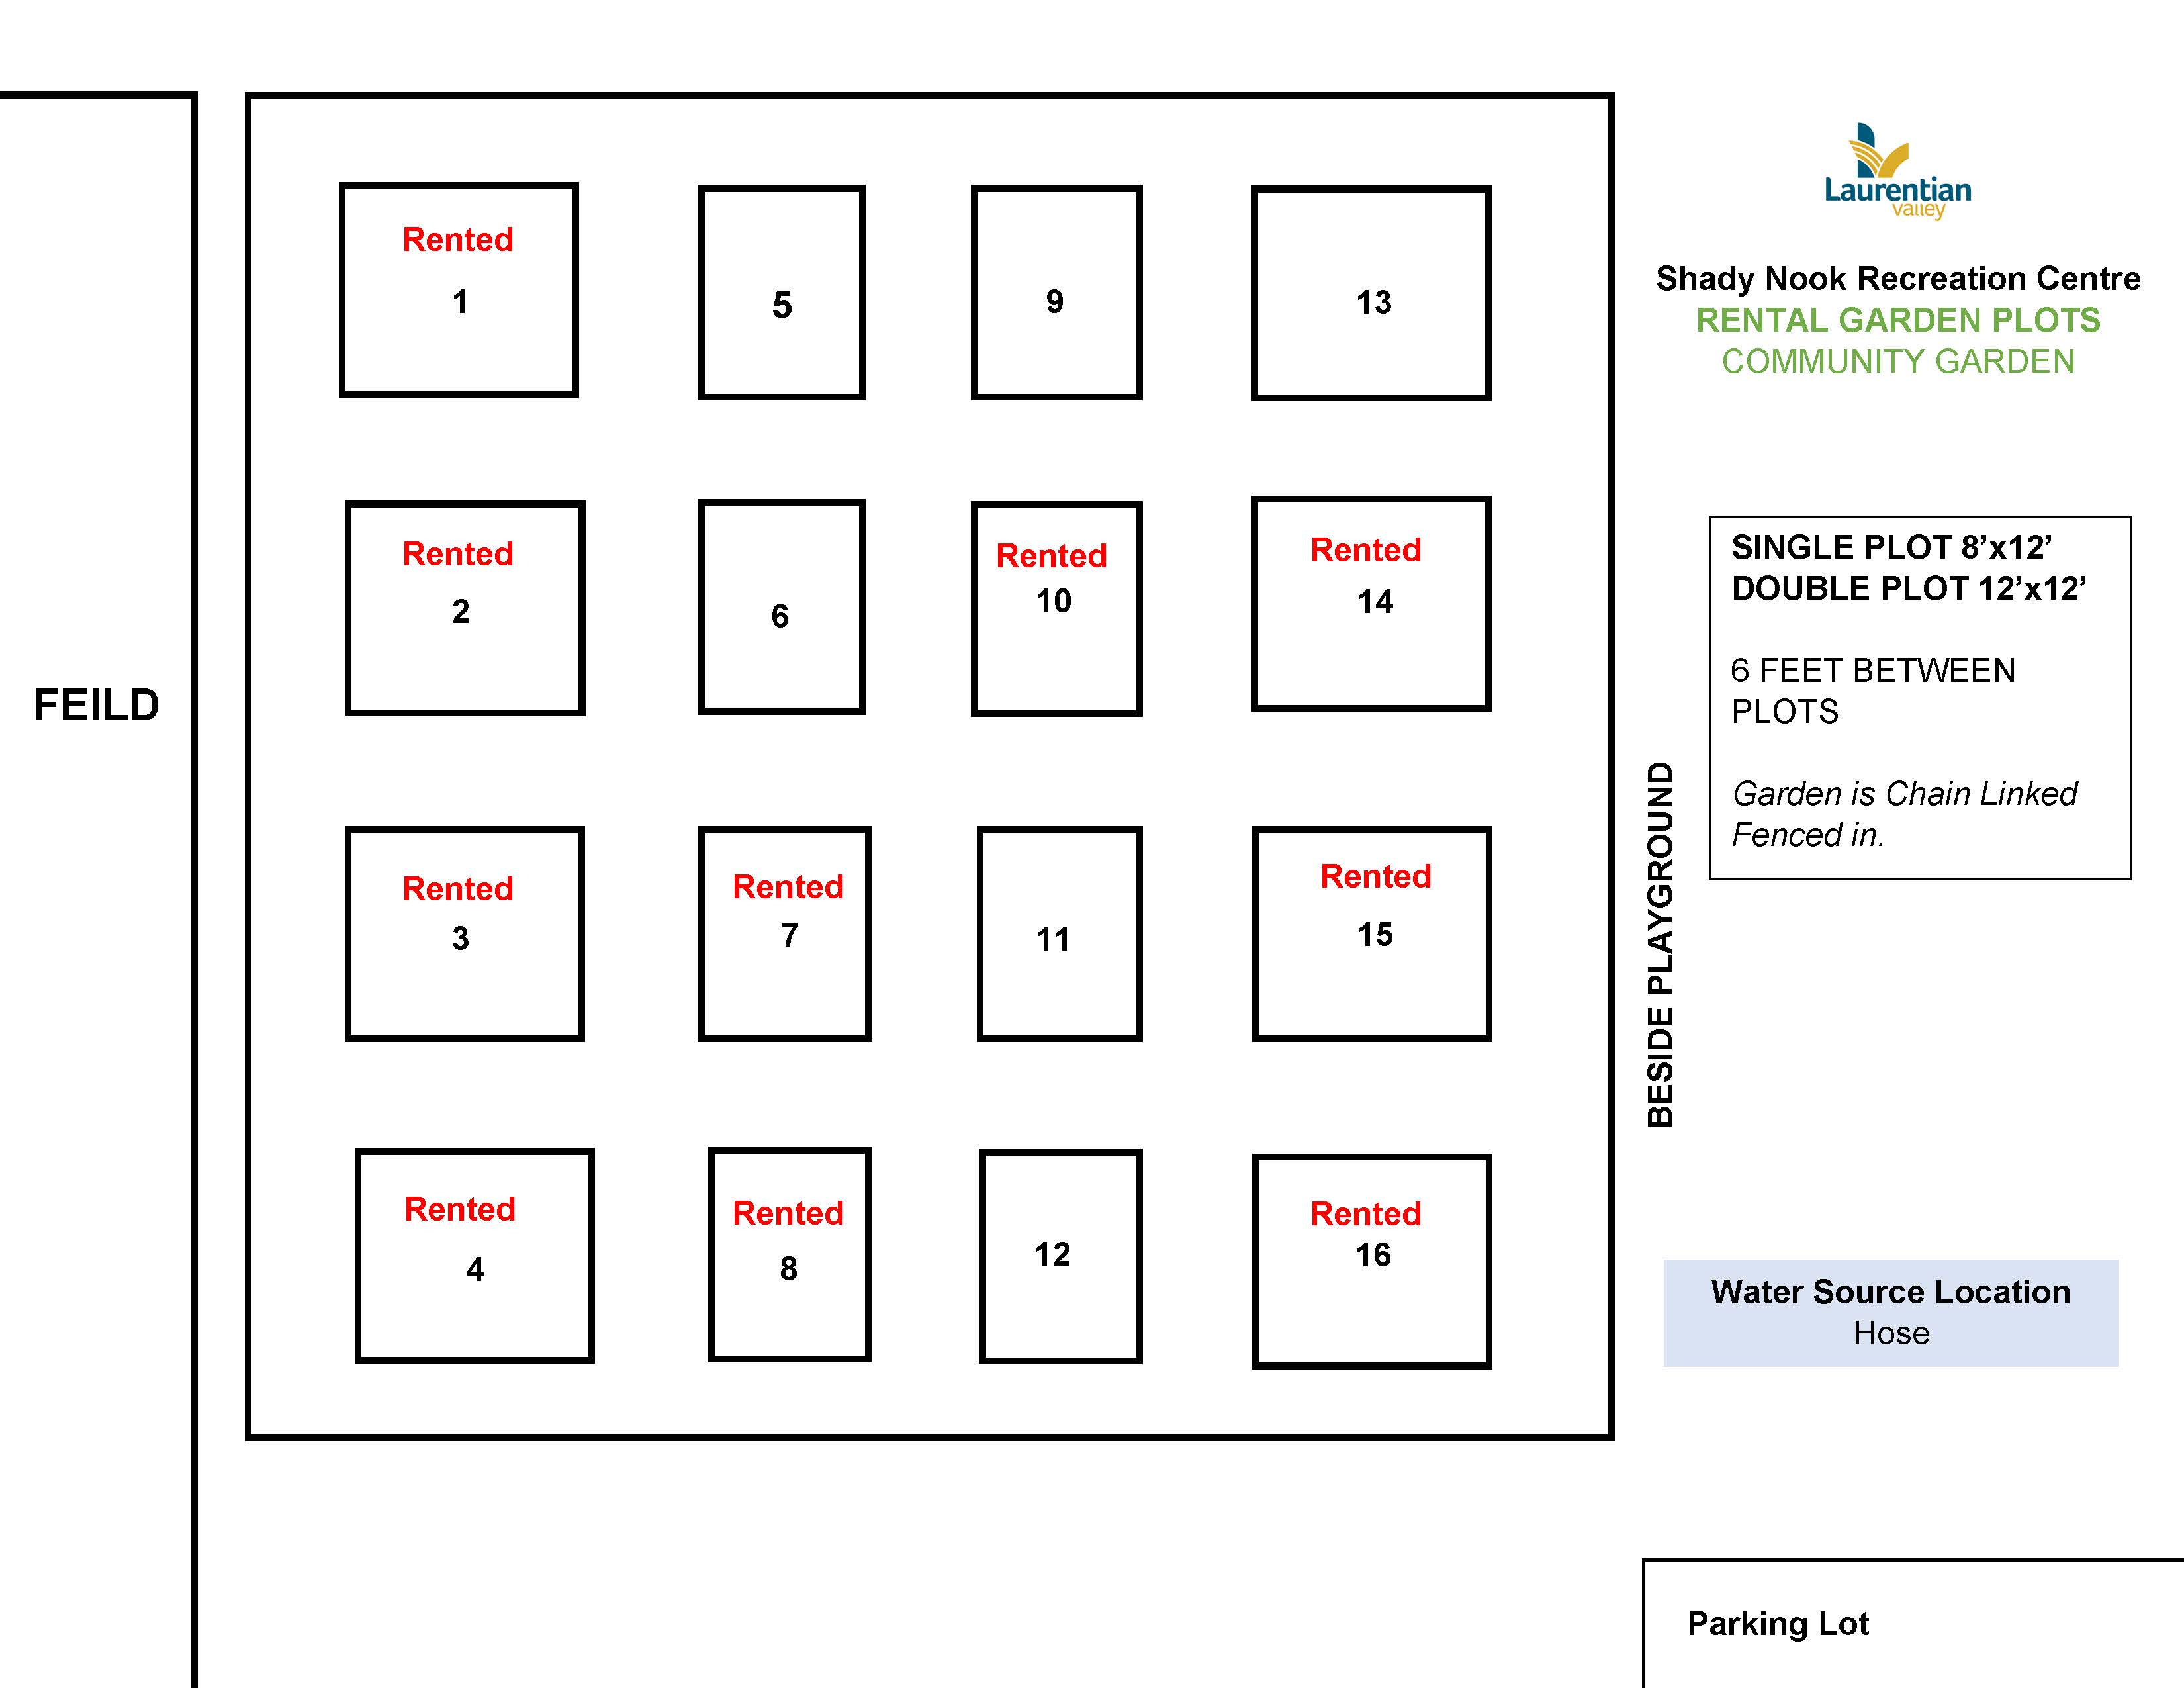 Image of available plots for Shady Nook Community Garden.